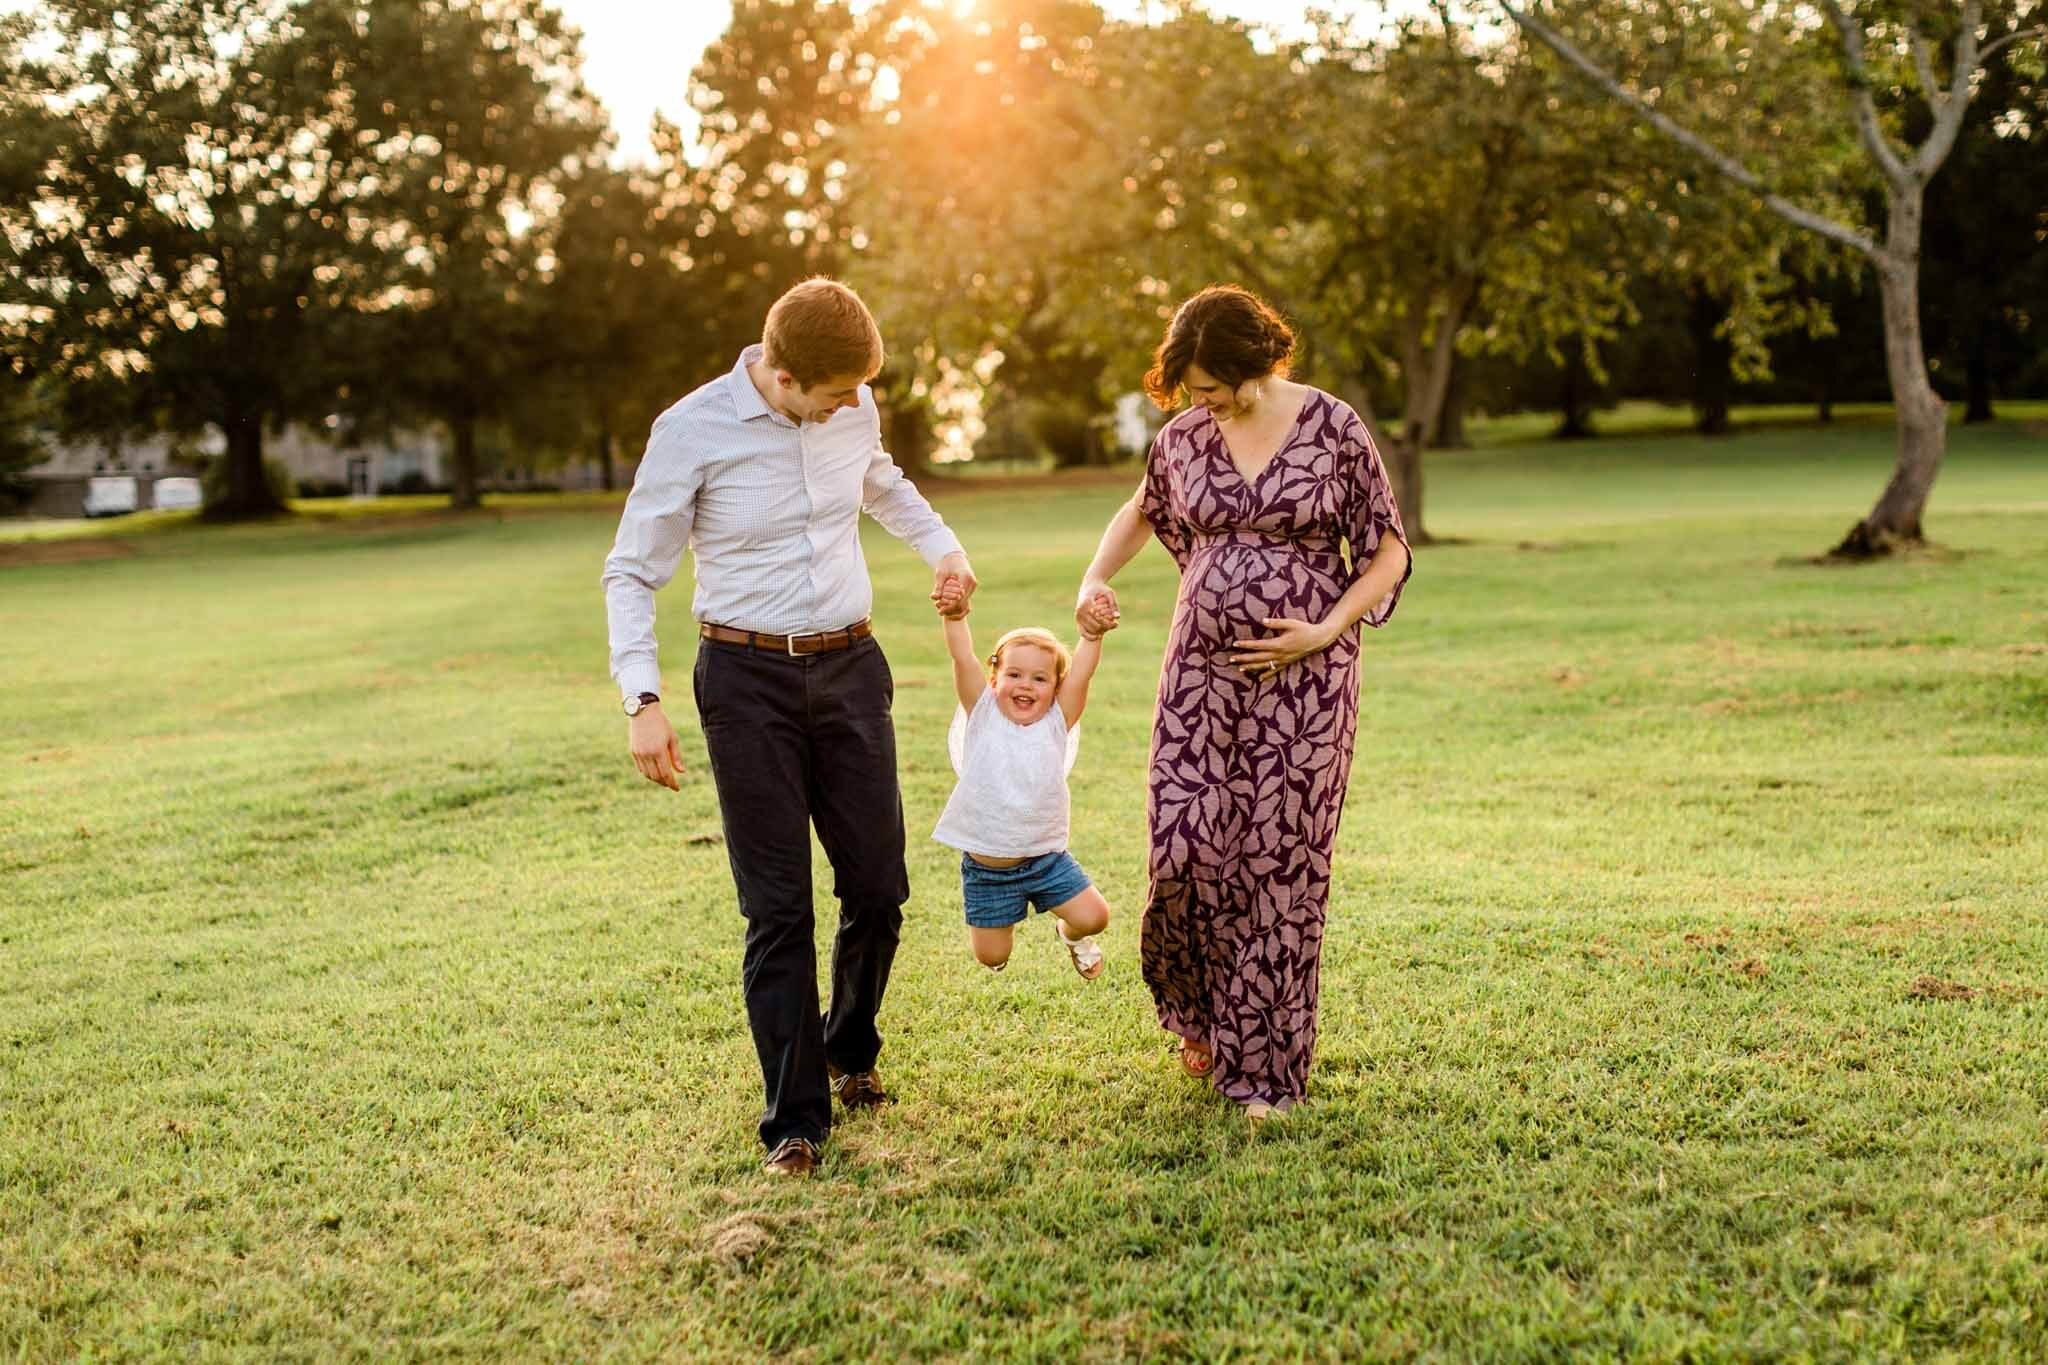 Raleigh Family Photographer at Dix Park | By G. Lin Photography | Parents swinging daughter outside